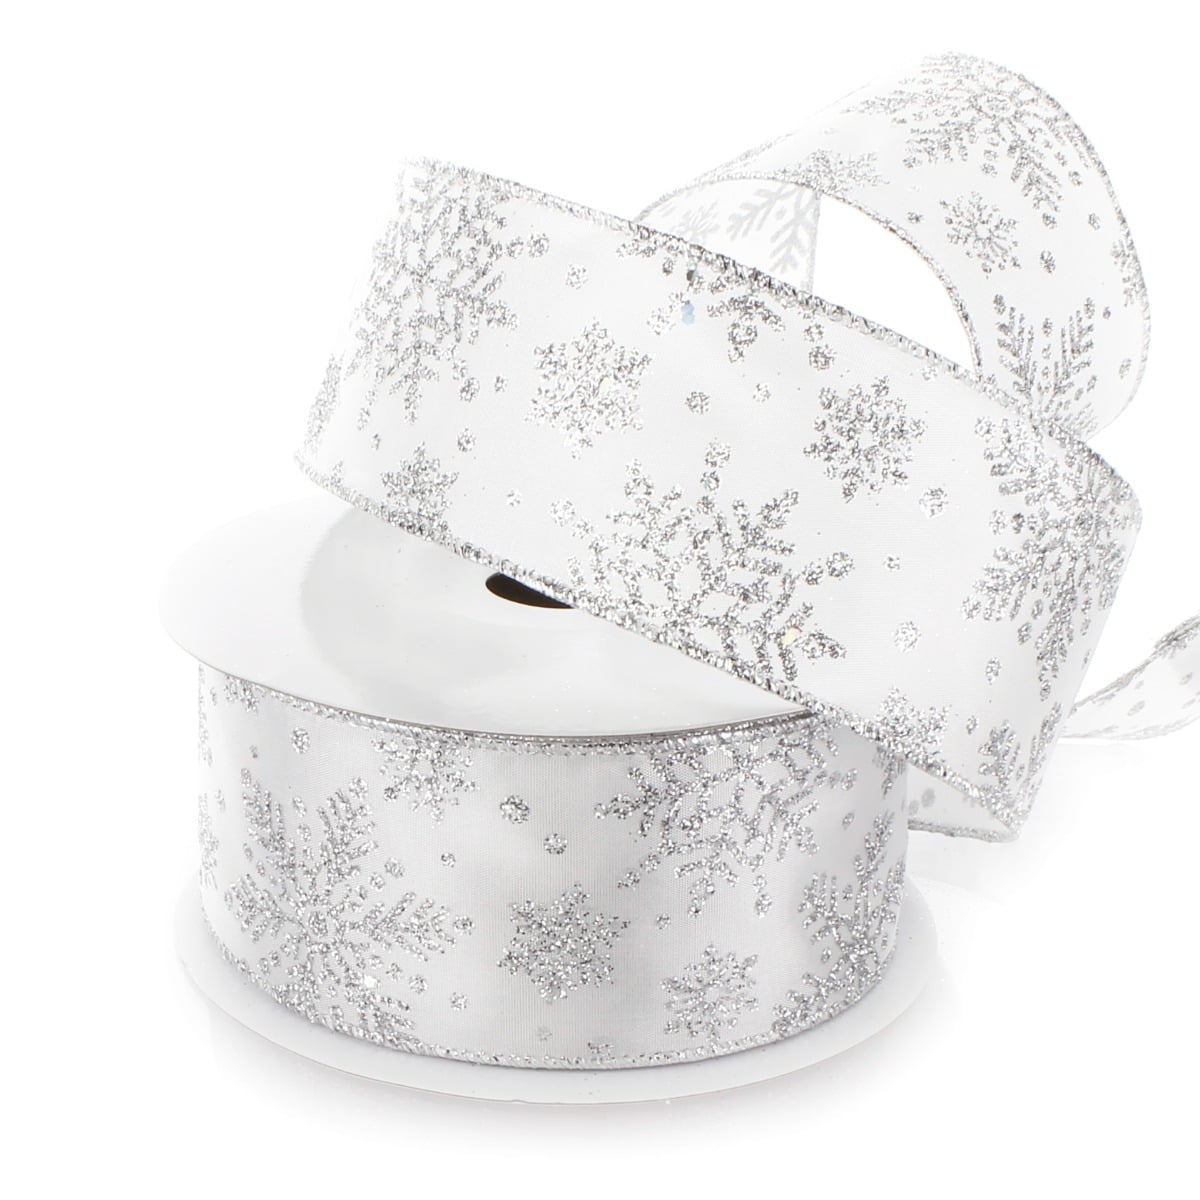 Red curling ribbon with snowflakes on white (2277156)